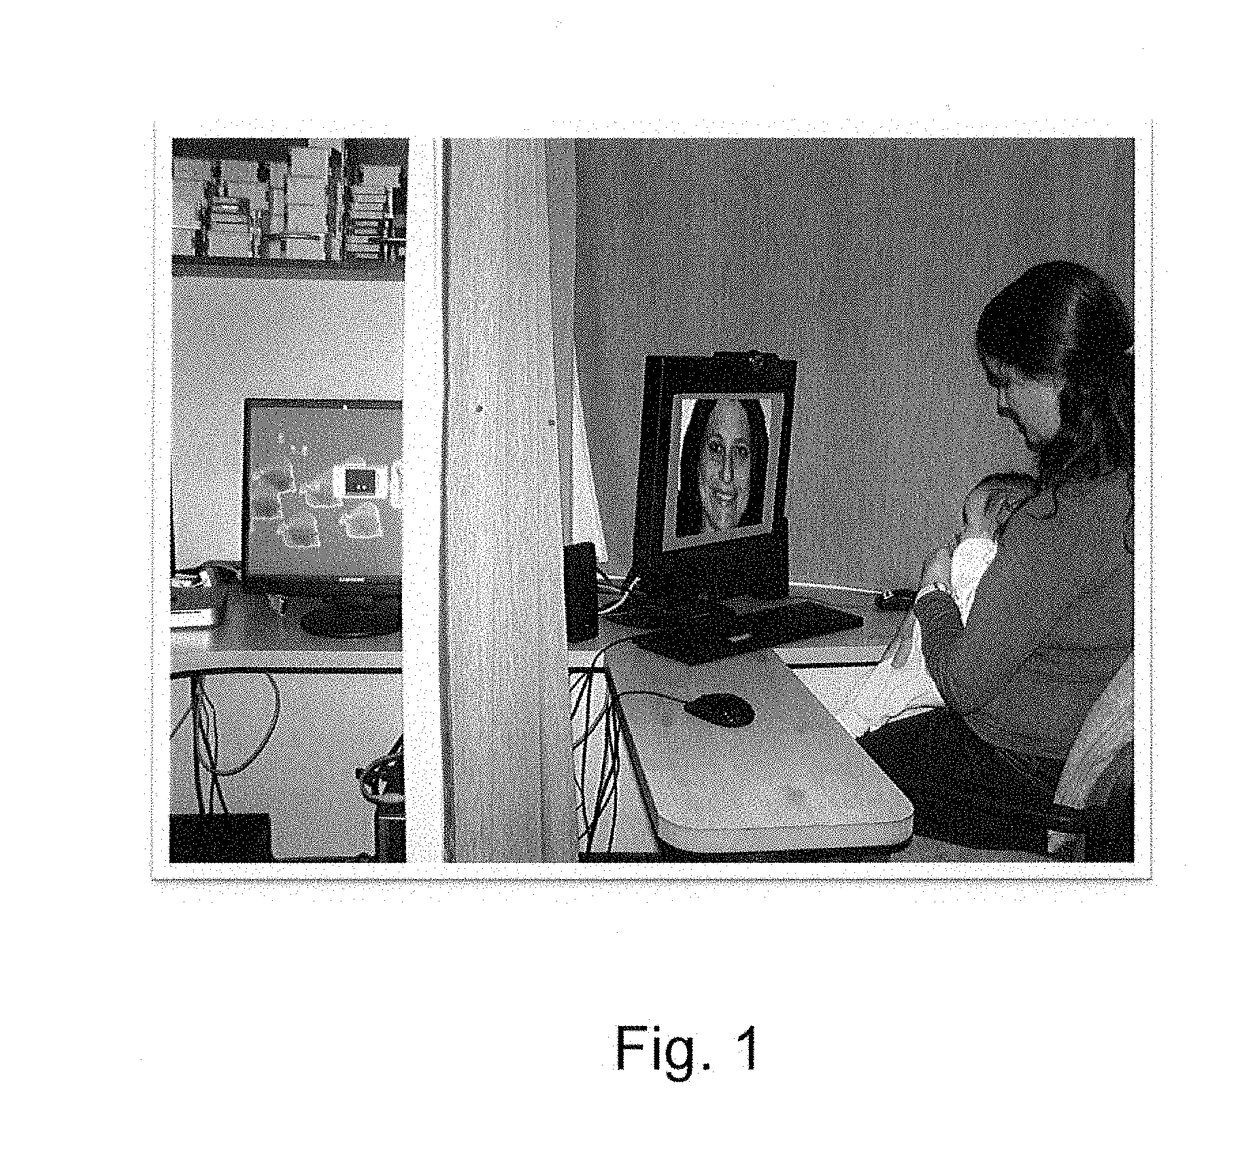 Interactive system and method for the diagnosis and treatment of social communication or attention disorders in infants and children